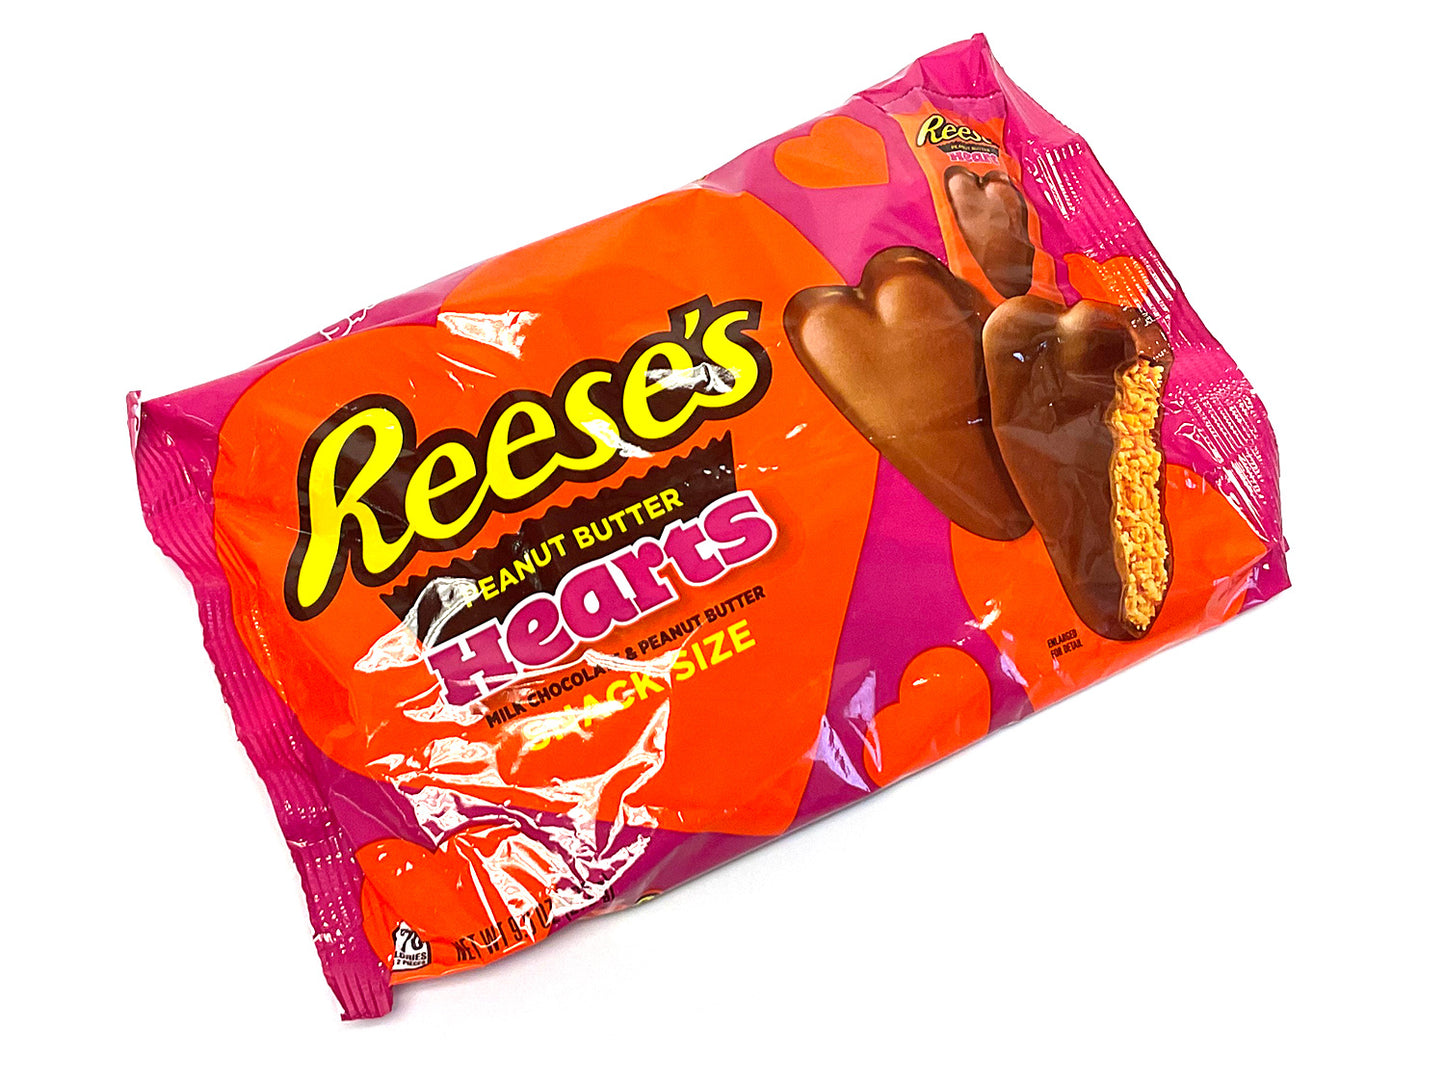 Reese's Peanut Butter Hearts - Snack Size - 9.6 oz bag